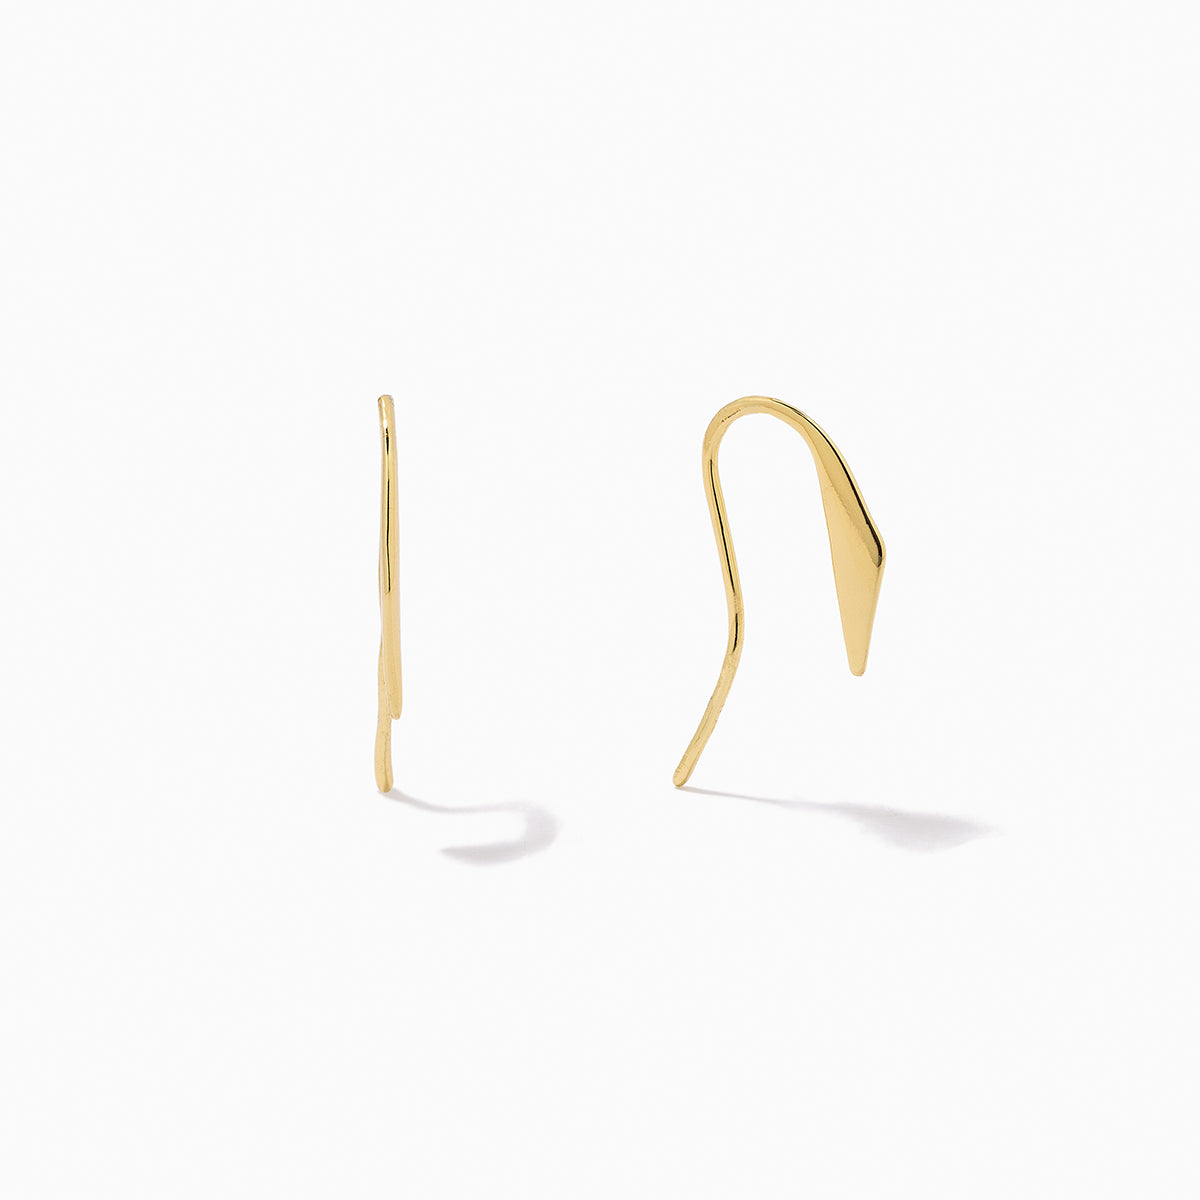 Living Legend Earrings | Gold | Product Image | Uncommon James